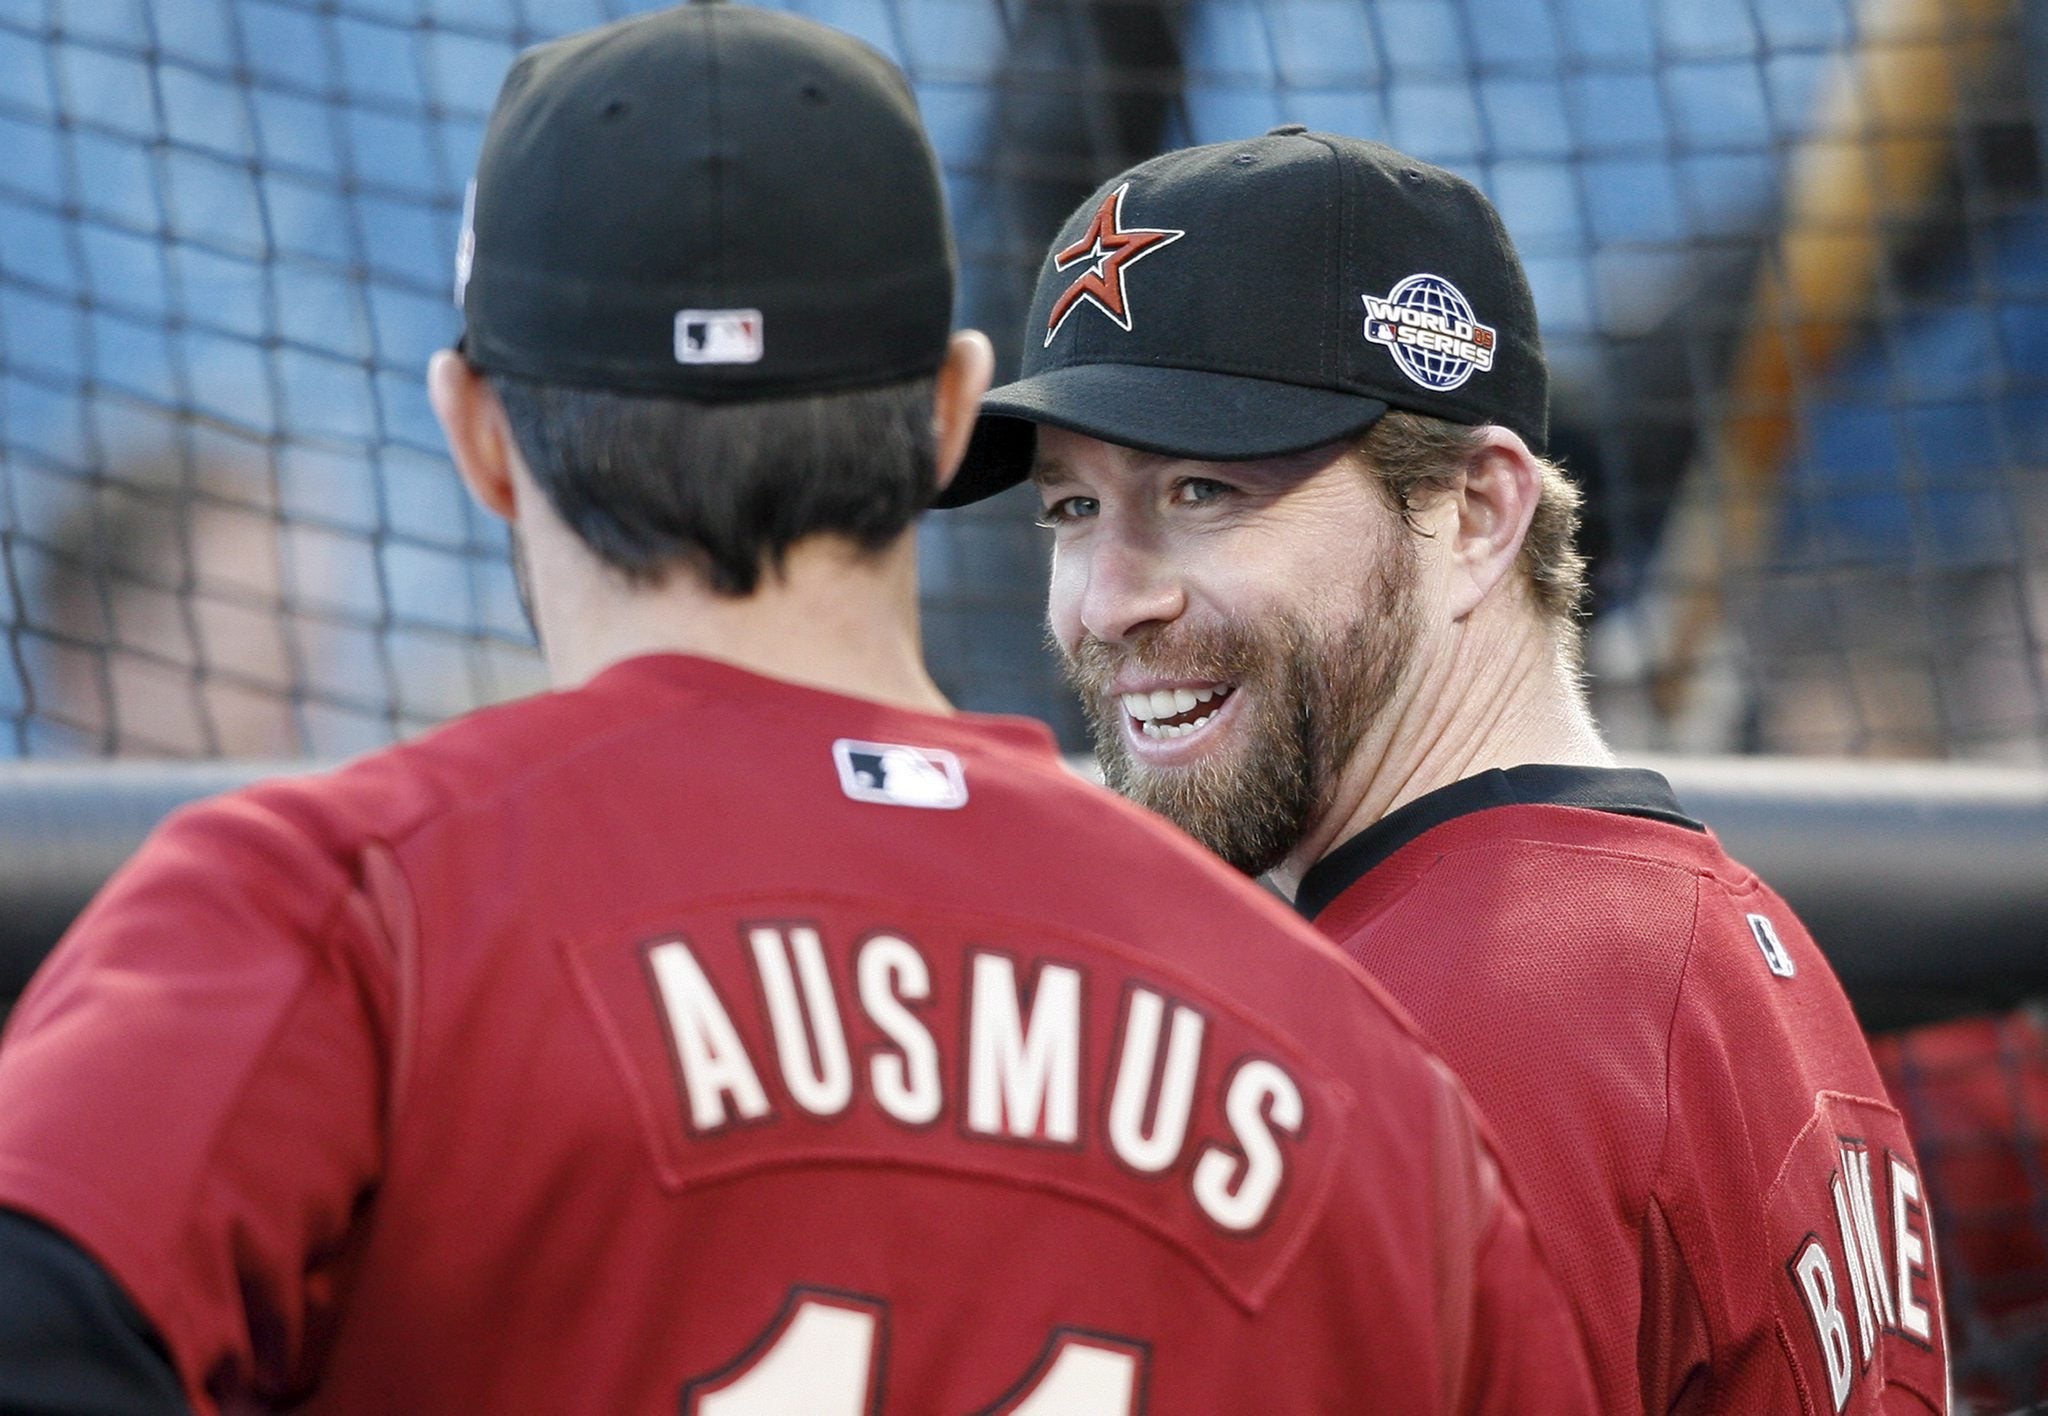 Former Red Sox infielder Jeff Bagwell among guest instructors at Astros camp